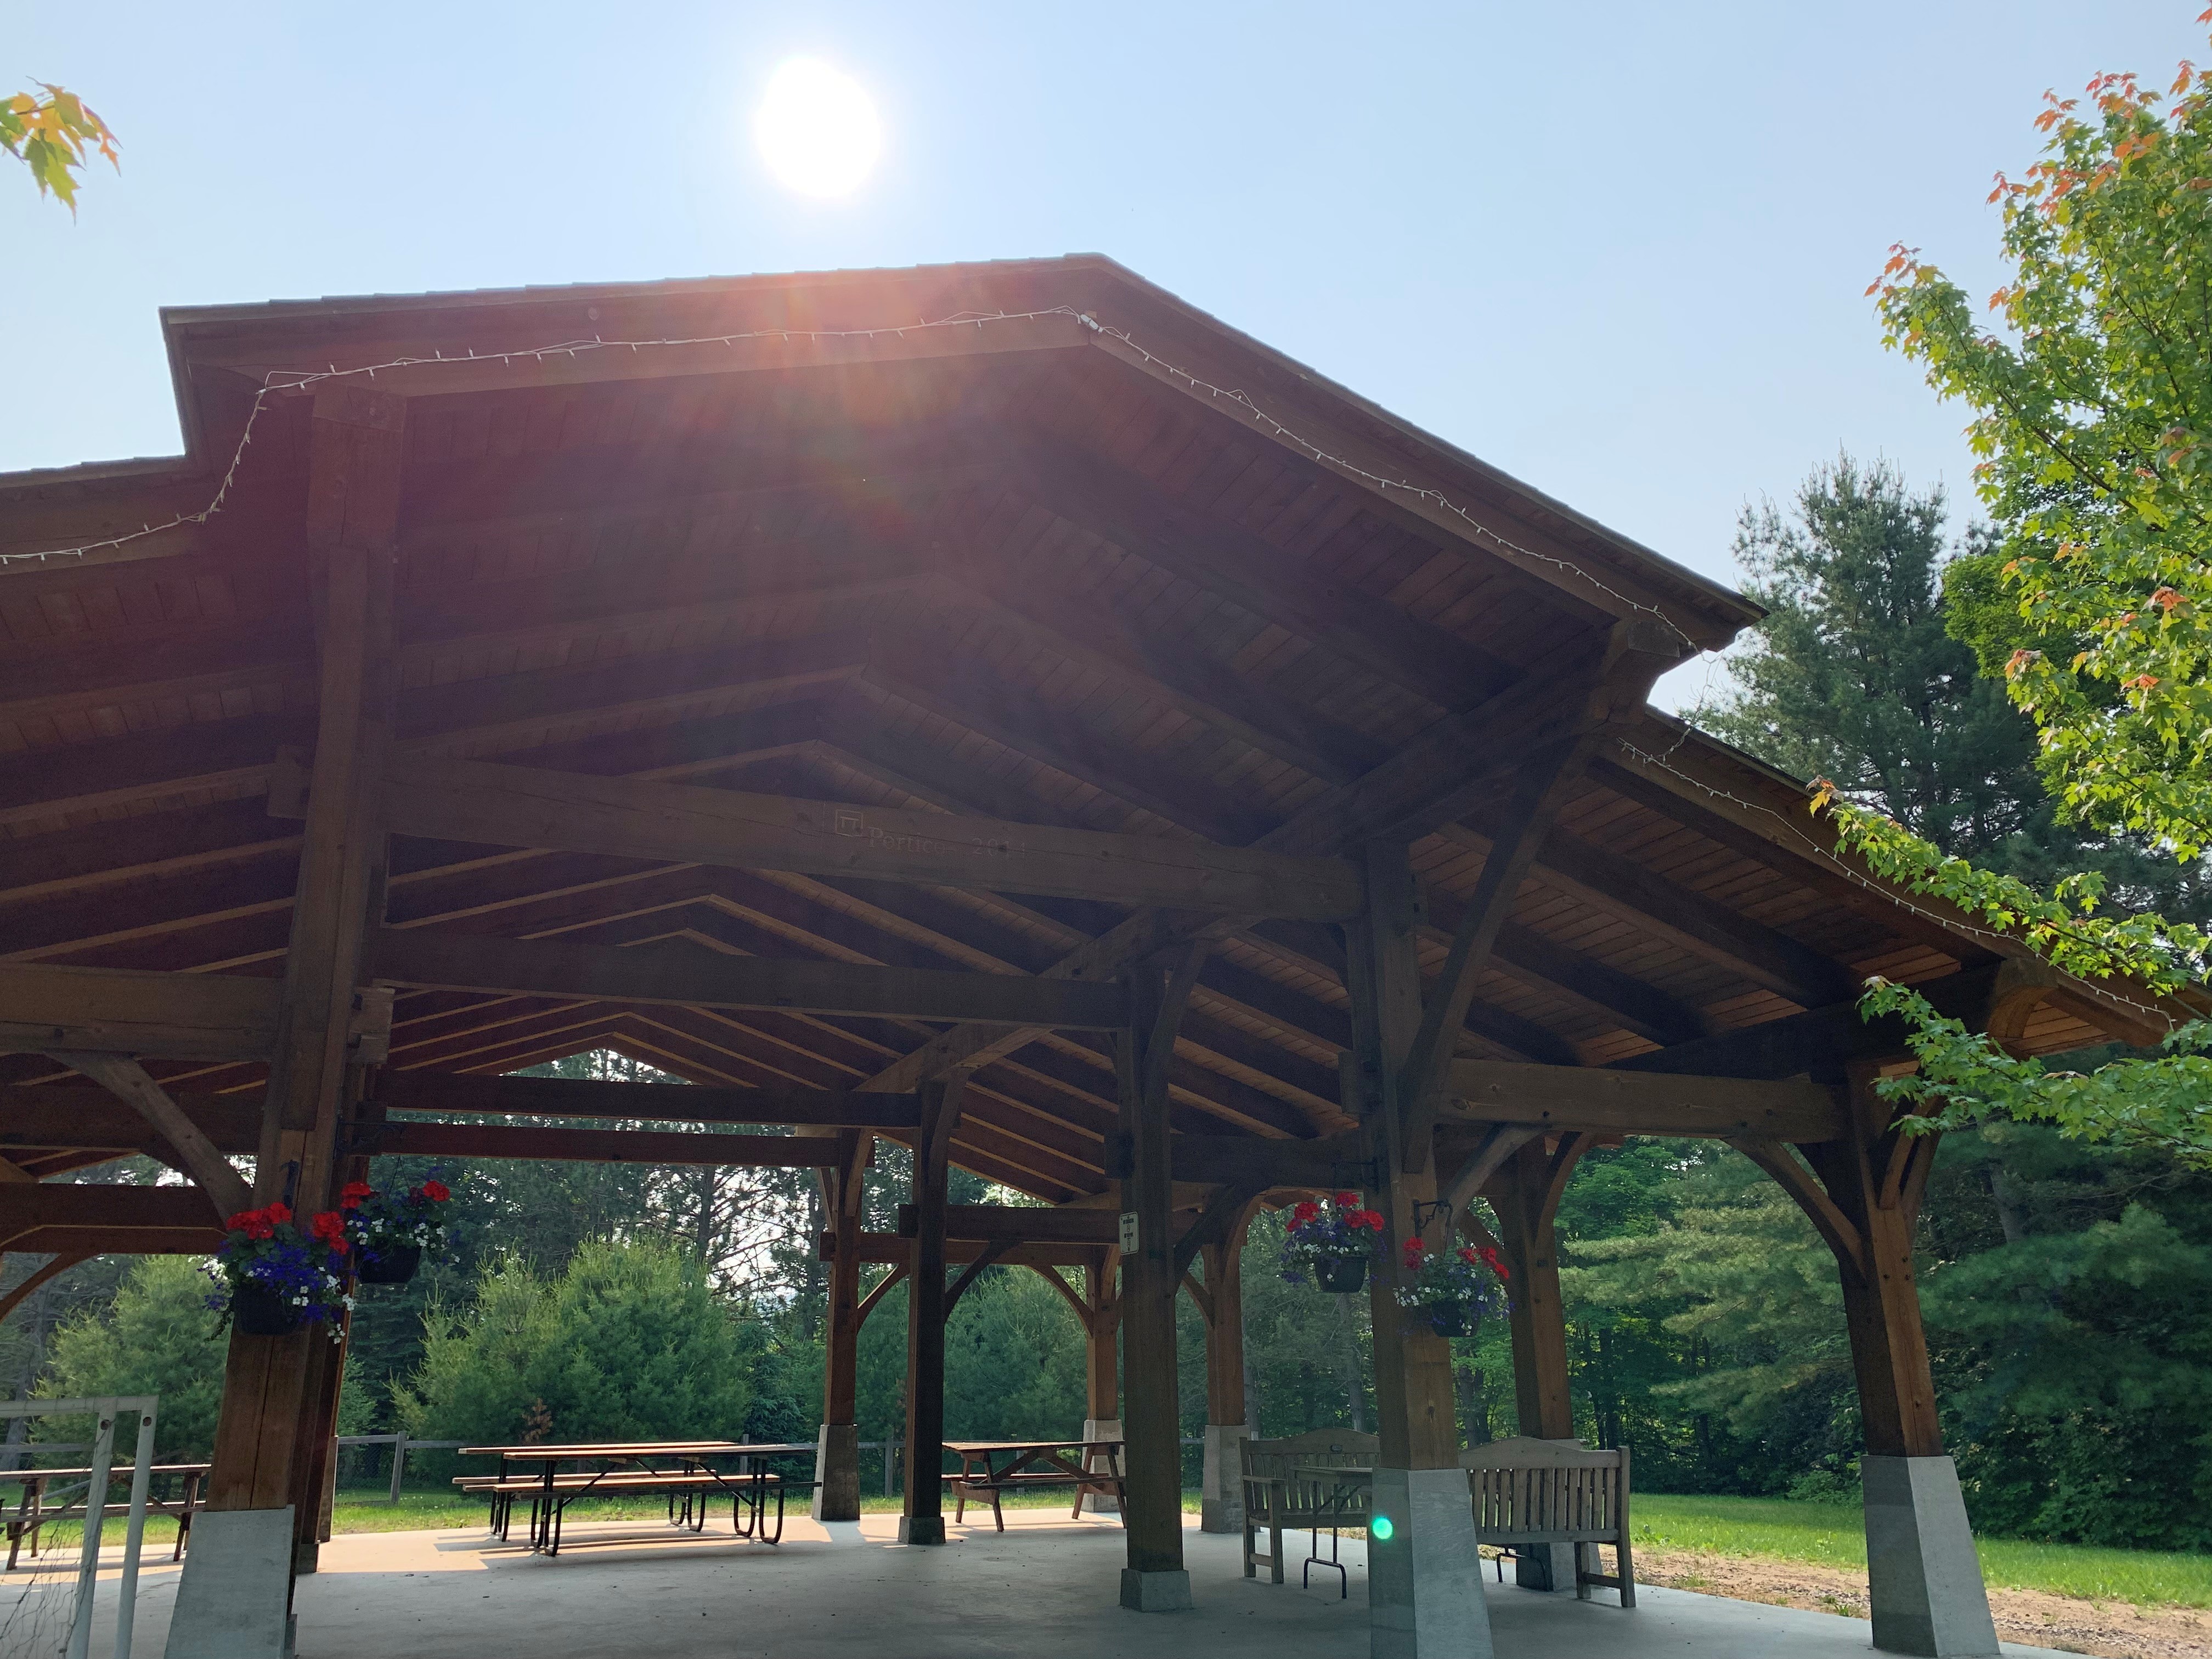 Image shows a picnic pavilion with sun overhead.